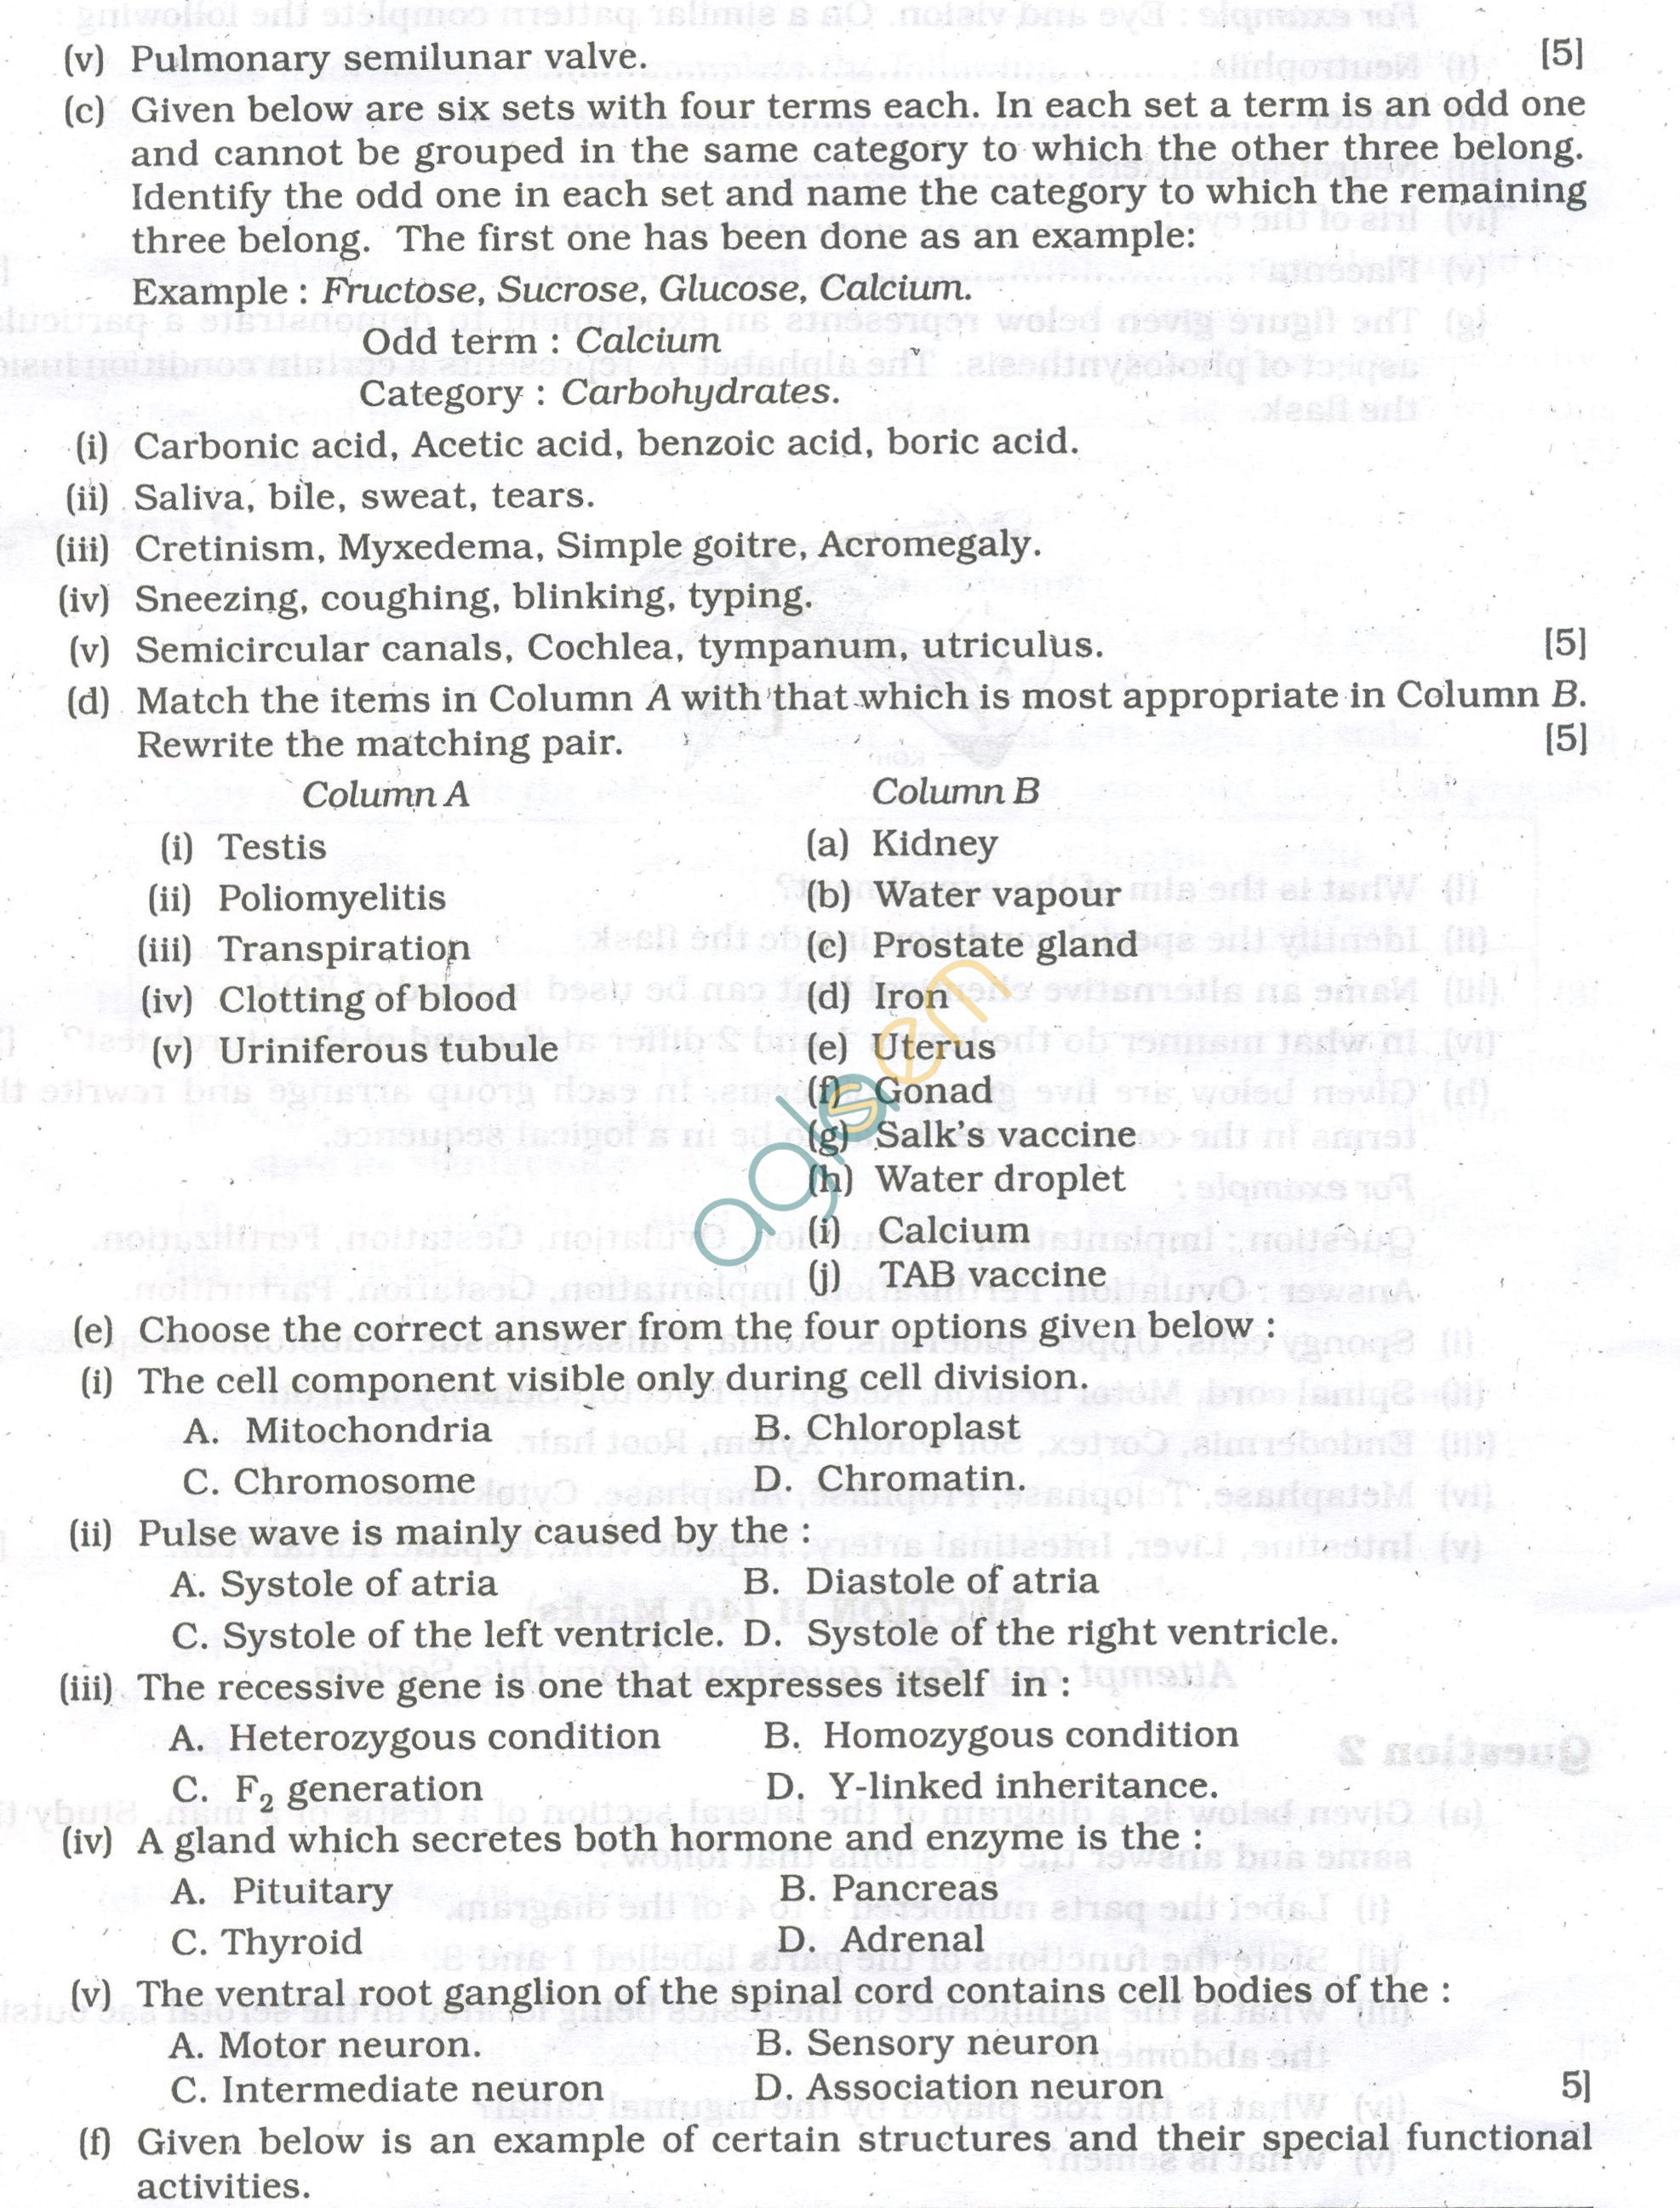 ICSE Question Papers 2013 for Class 10 - Biology/